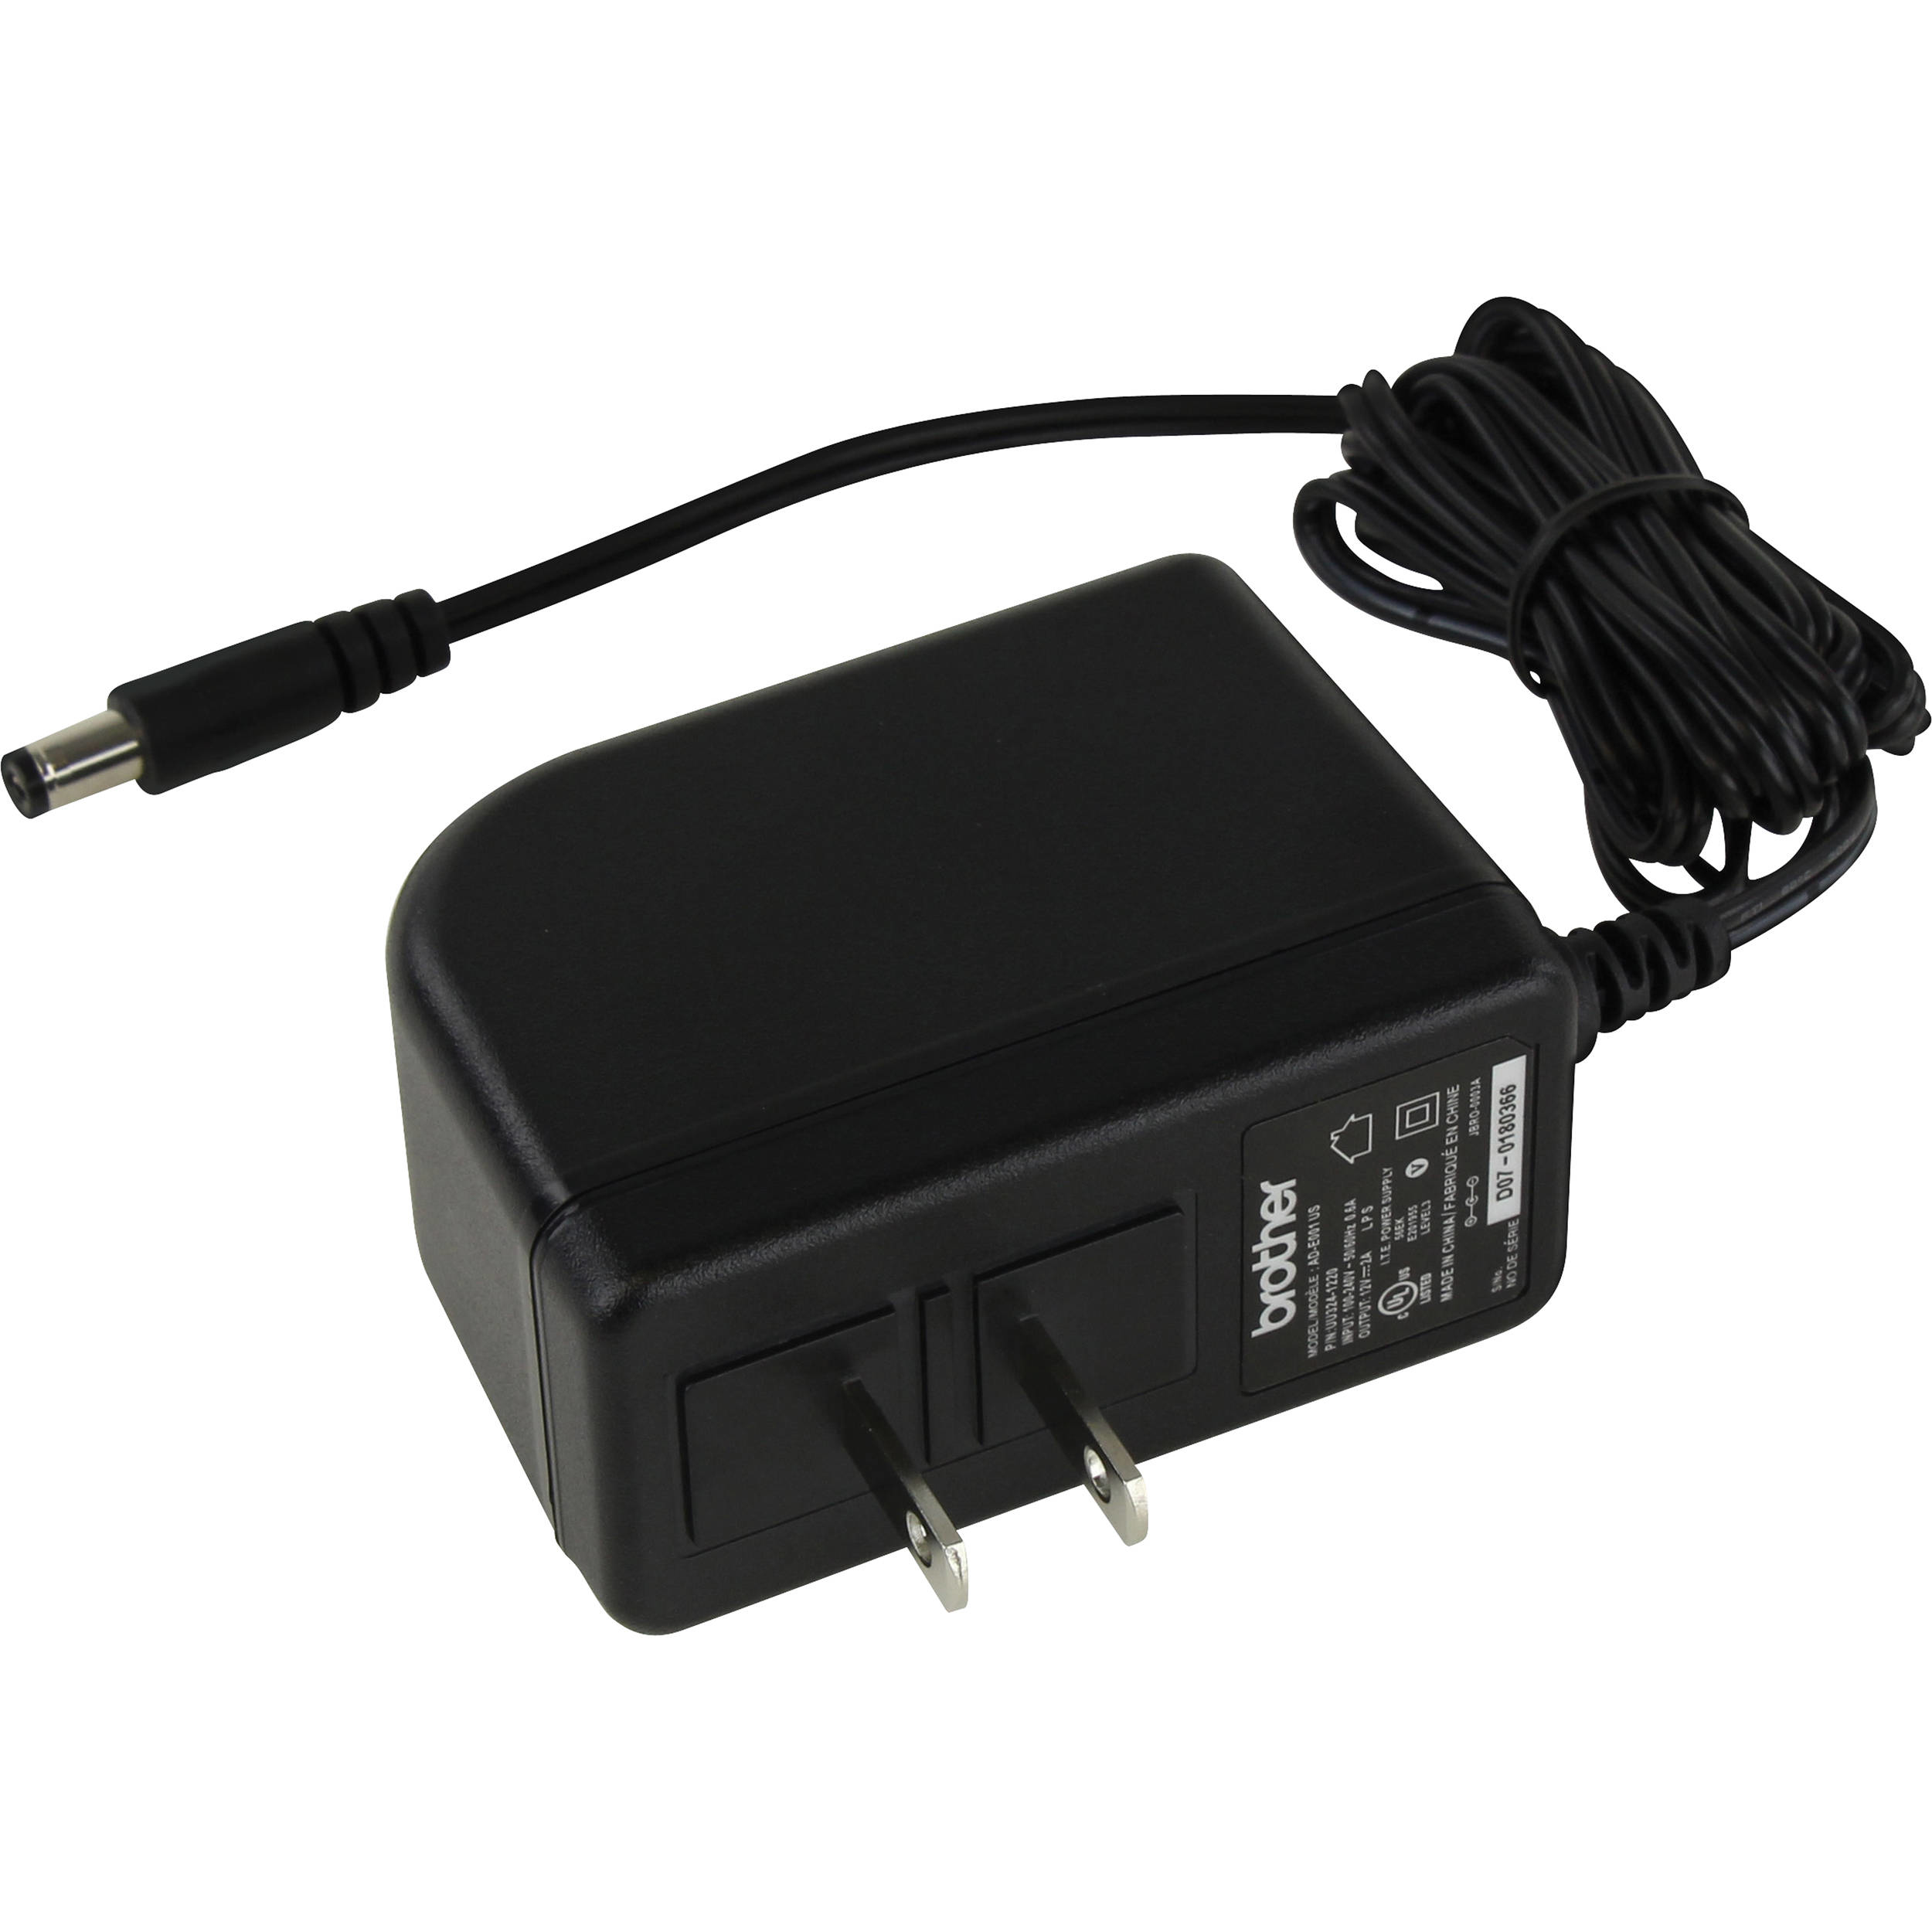 Brother ADE001 - Power adapter - AC 100-240 V - for Brother PT-D600, P-Touch PT-750, D400, D450, D600, E500, E550, P750, P-Touch EDGE PT-P750